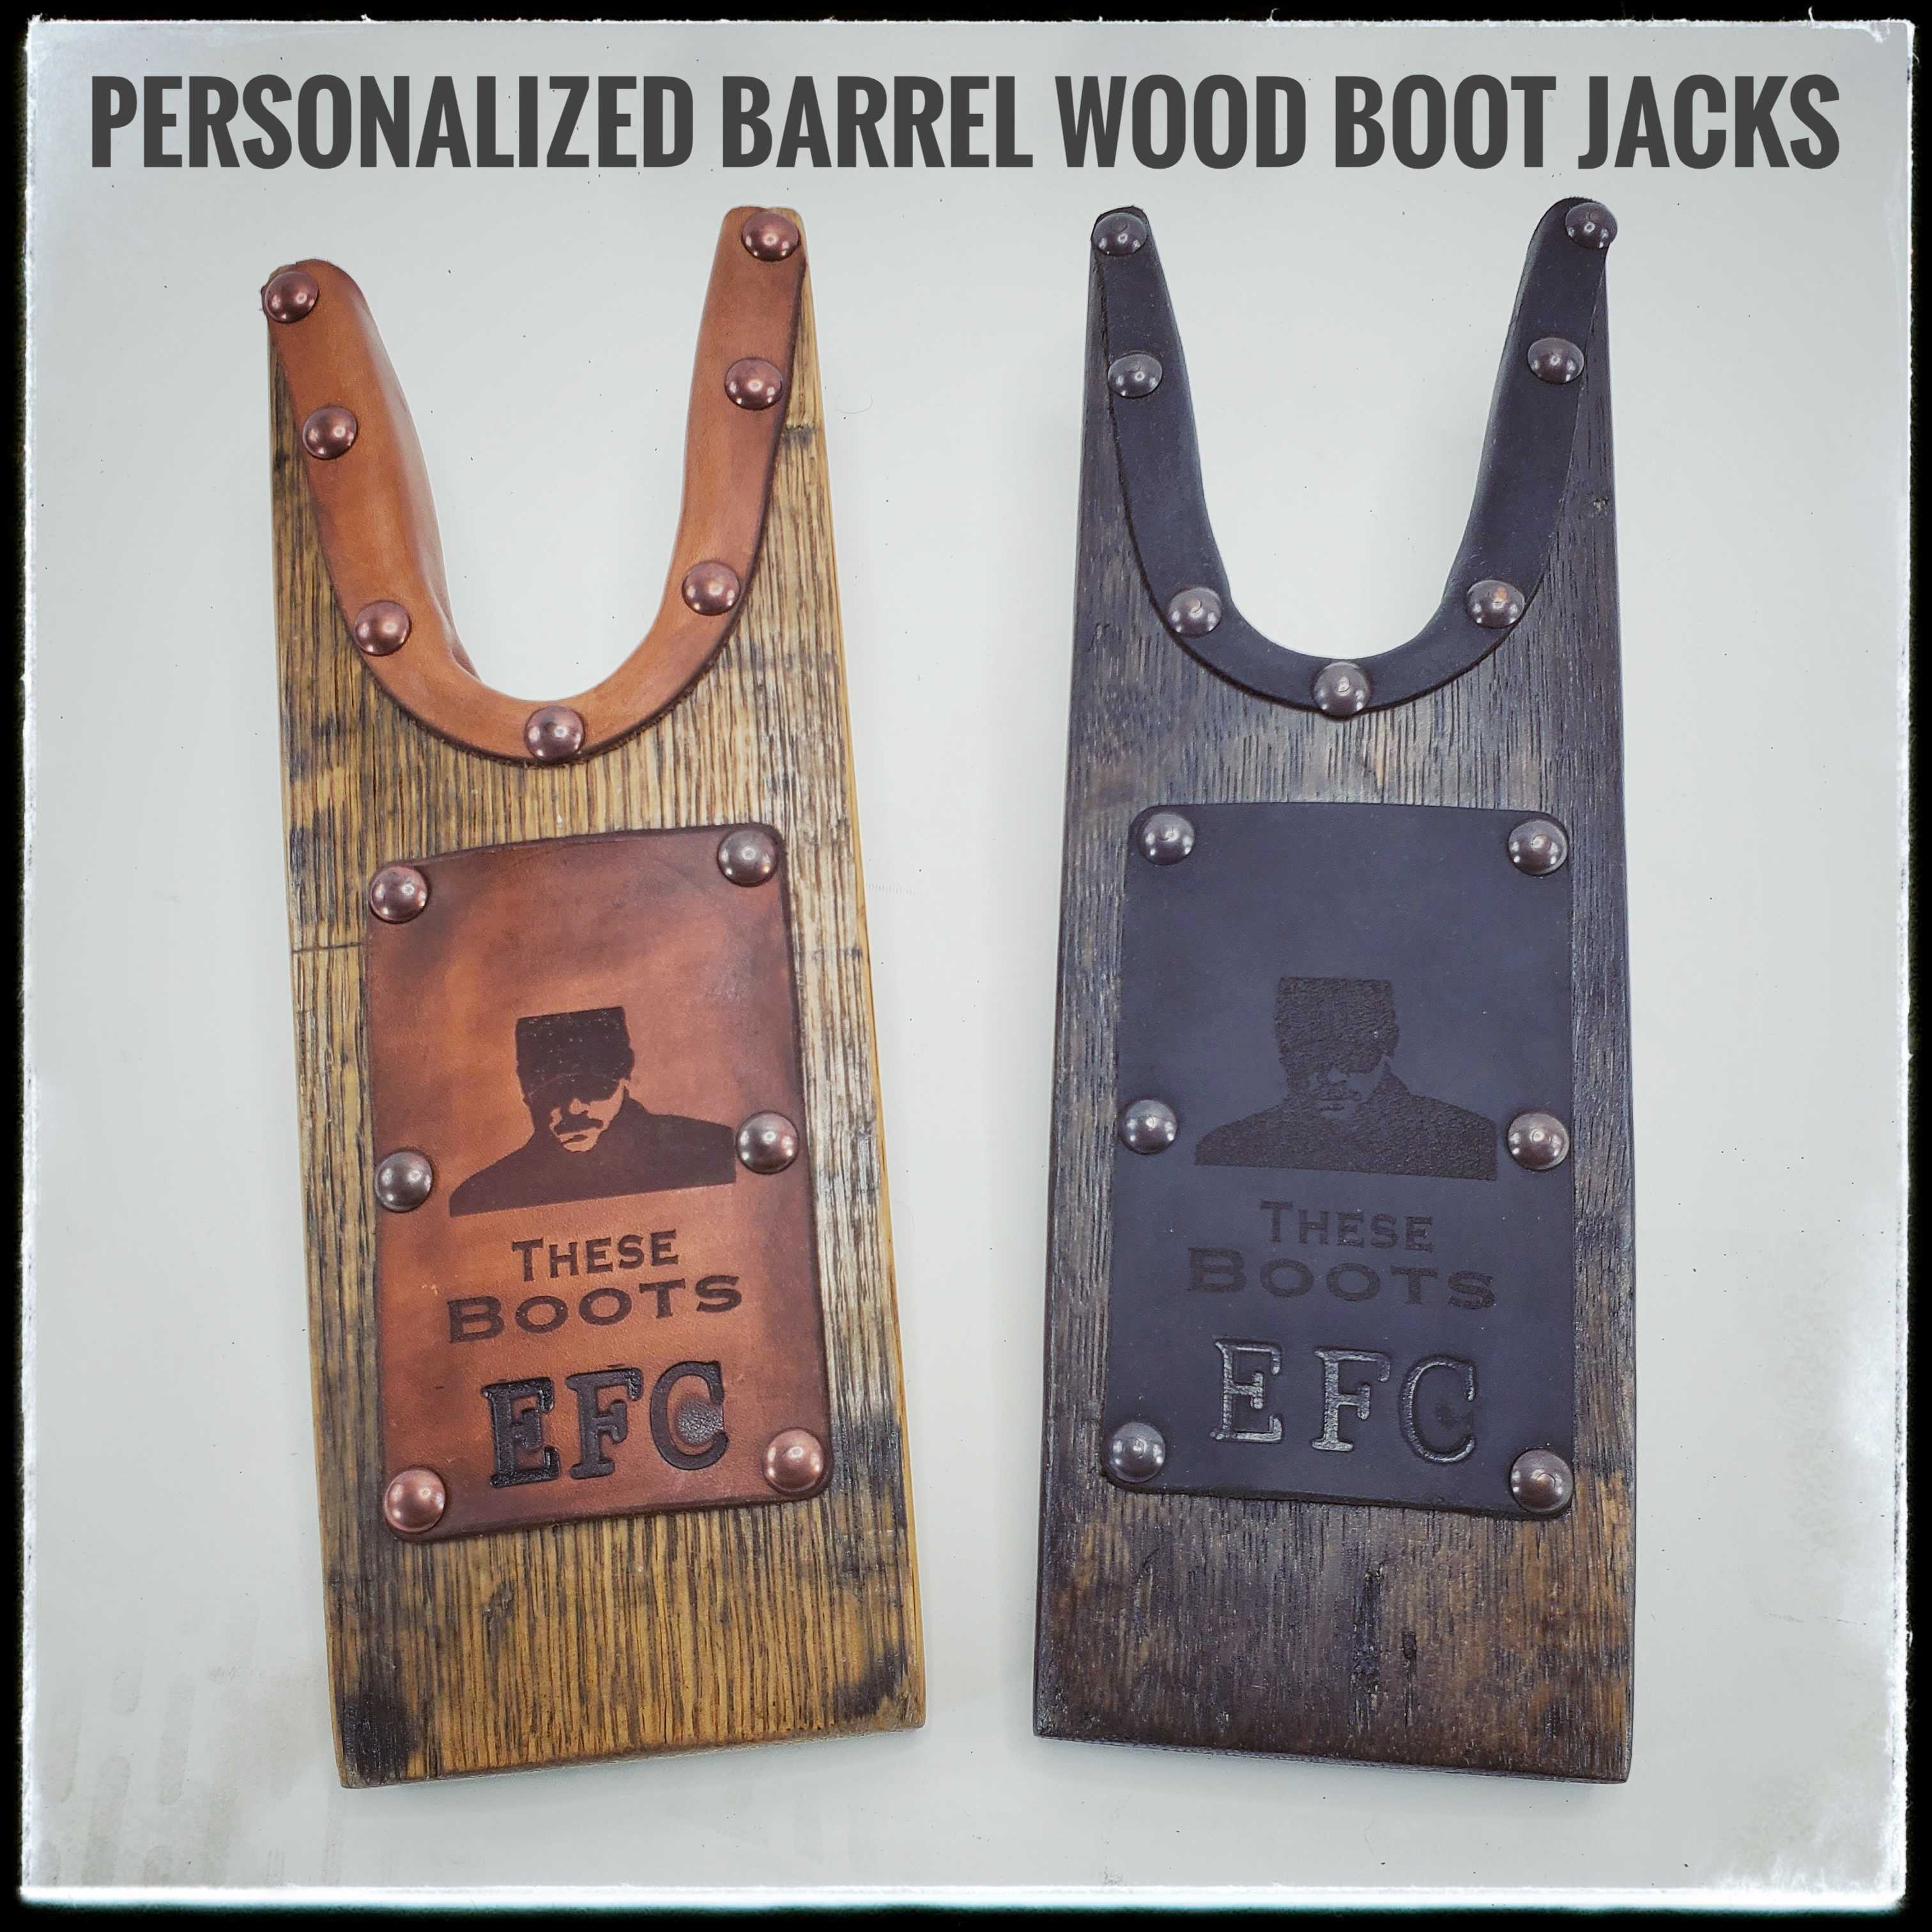 These Boot Jacks